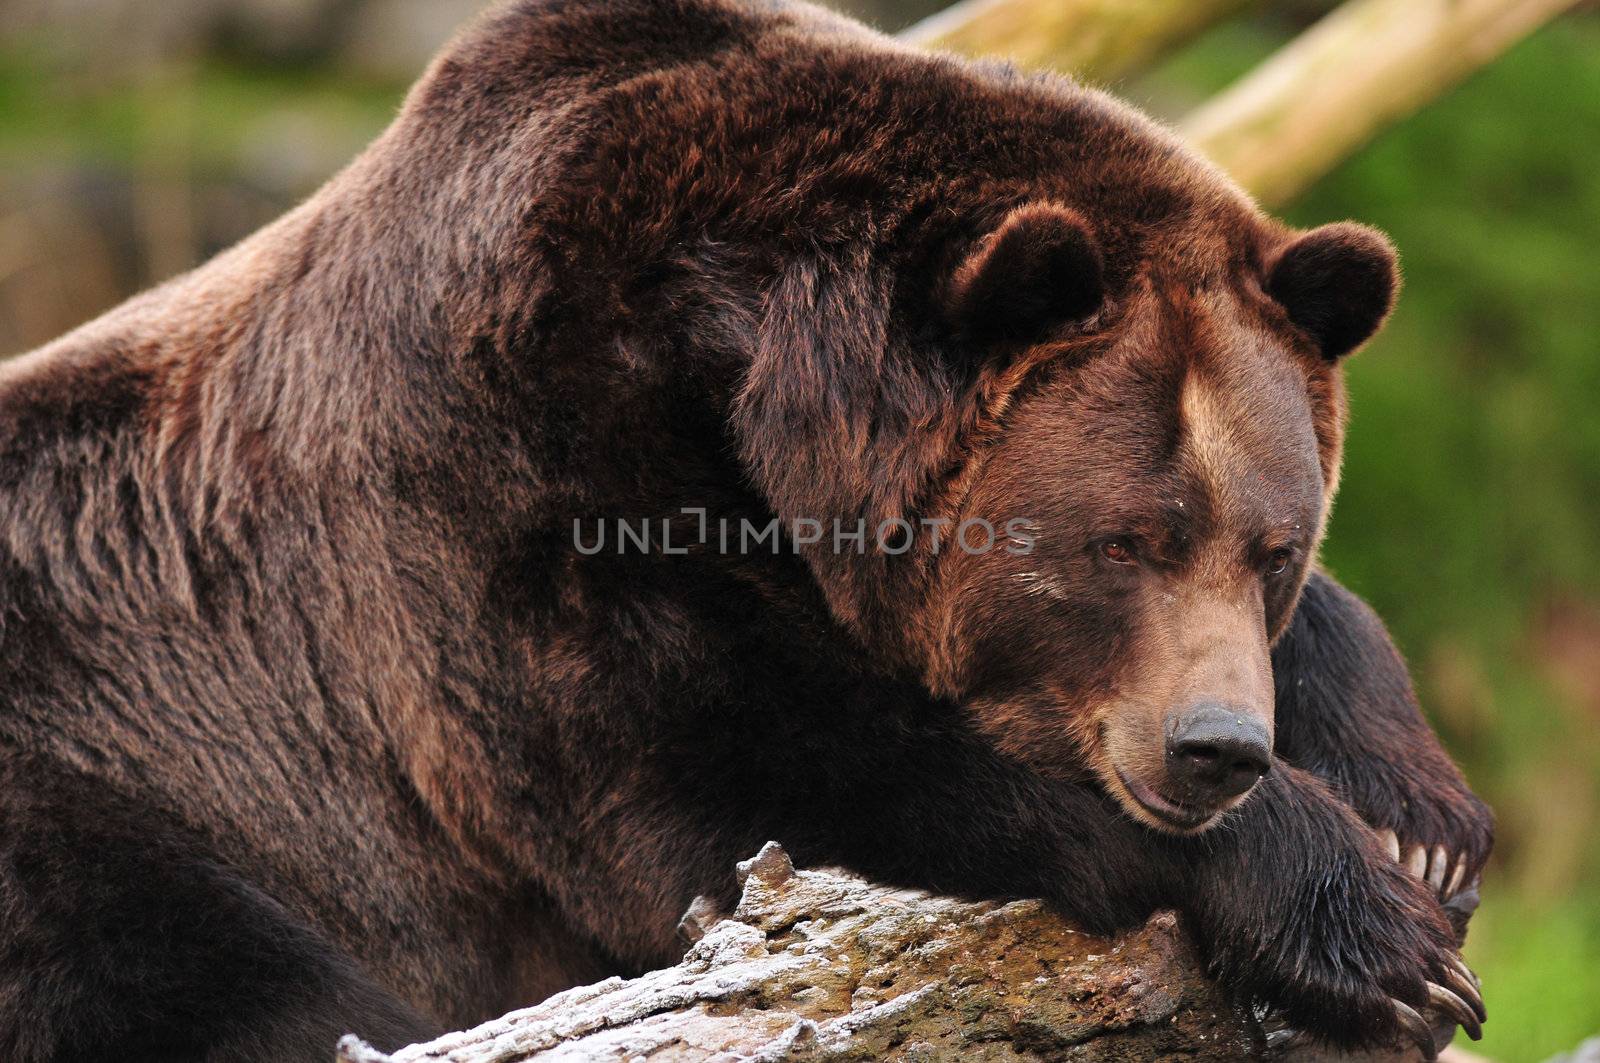 Alaskan brown bear day dreaming on a snow covered tree trunk